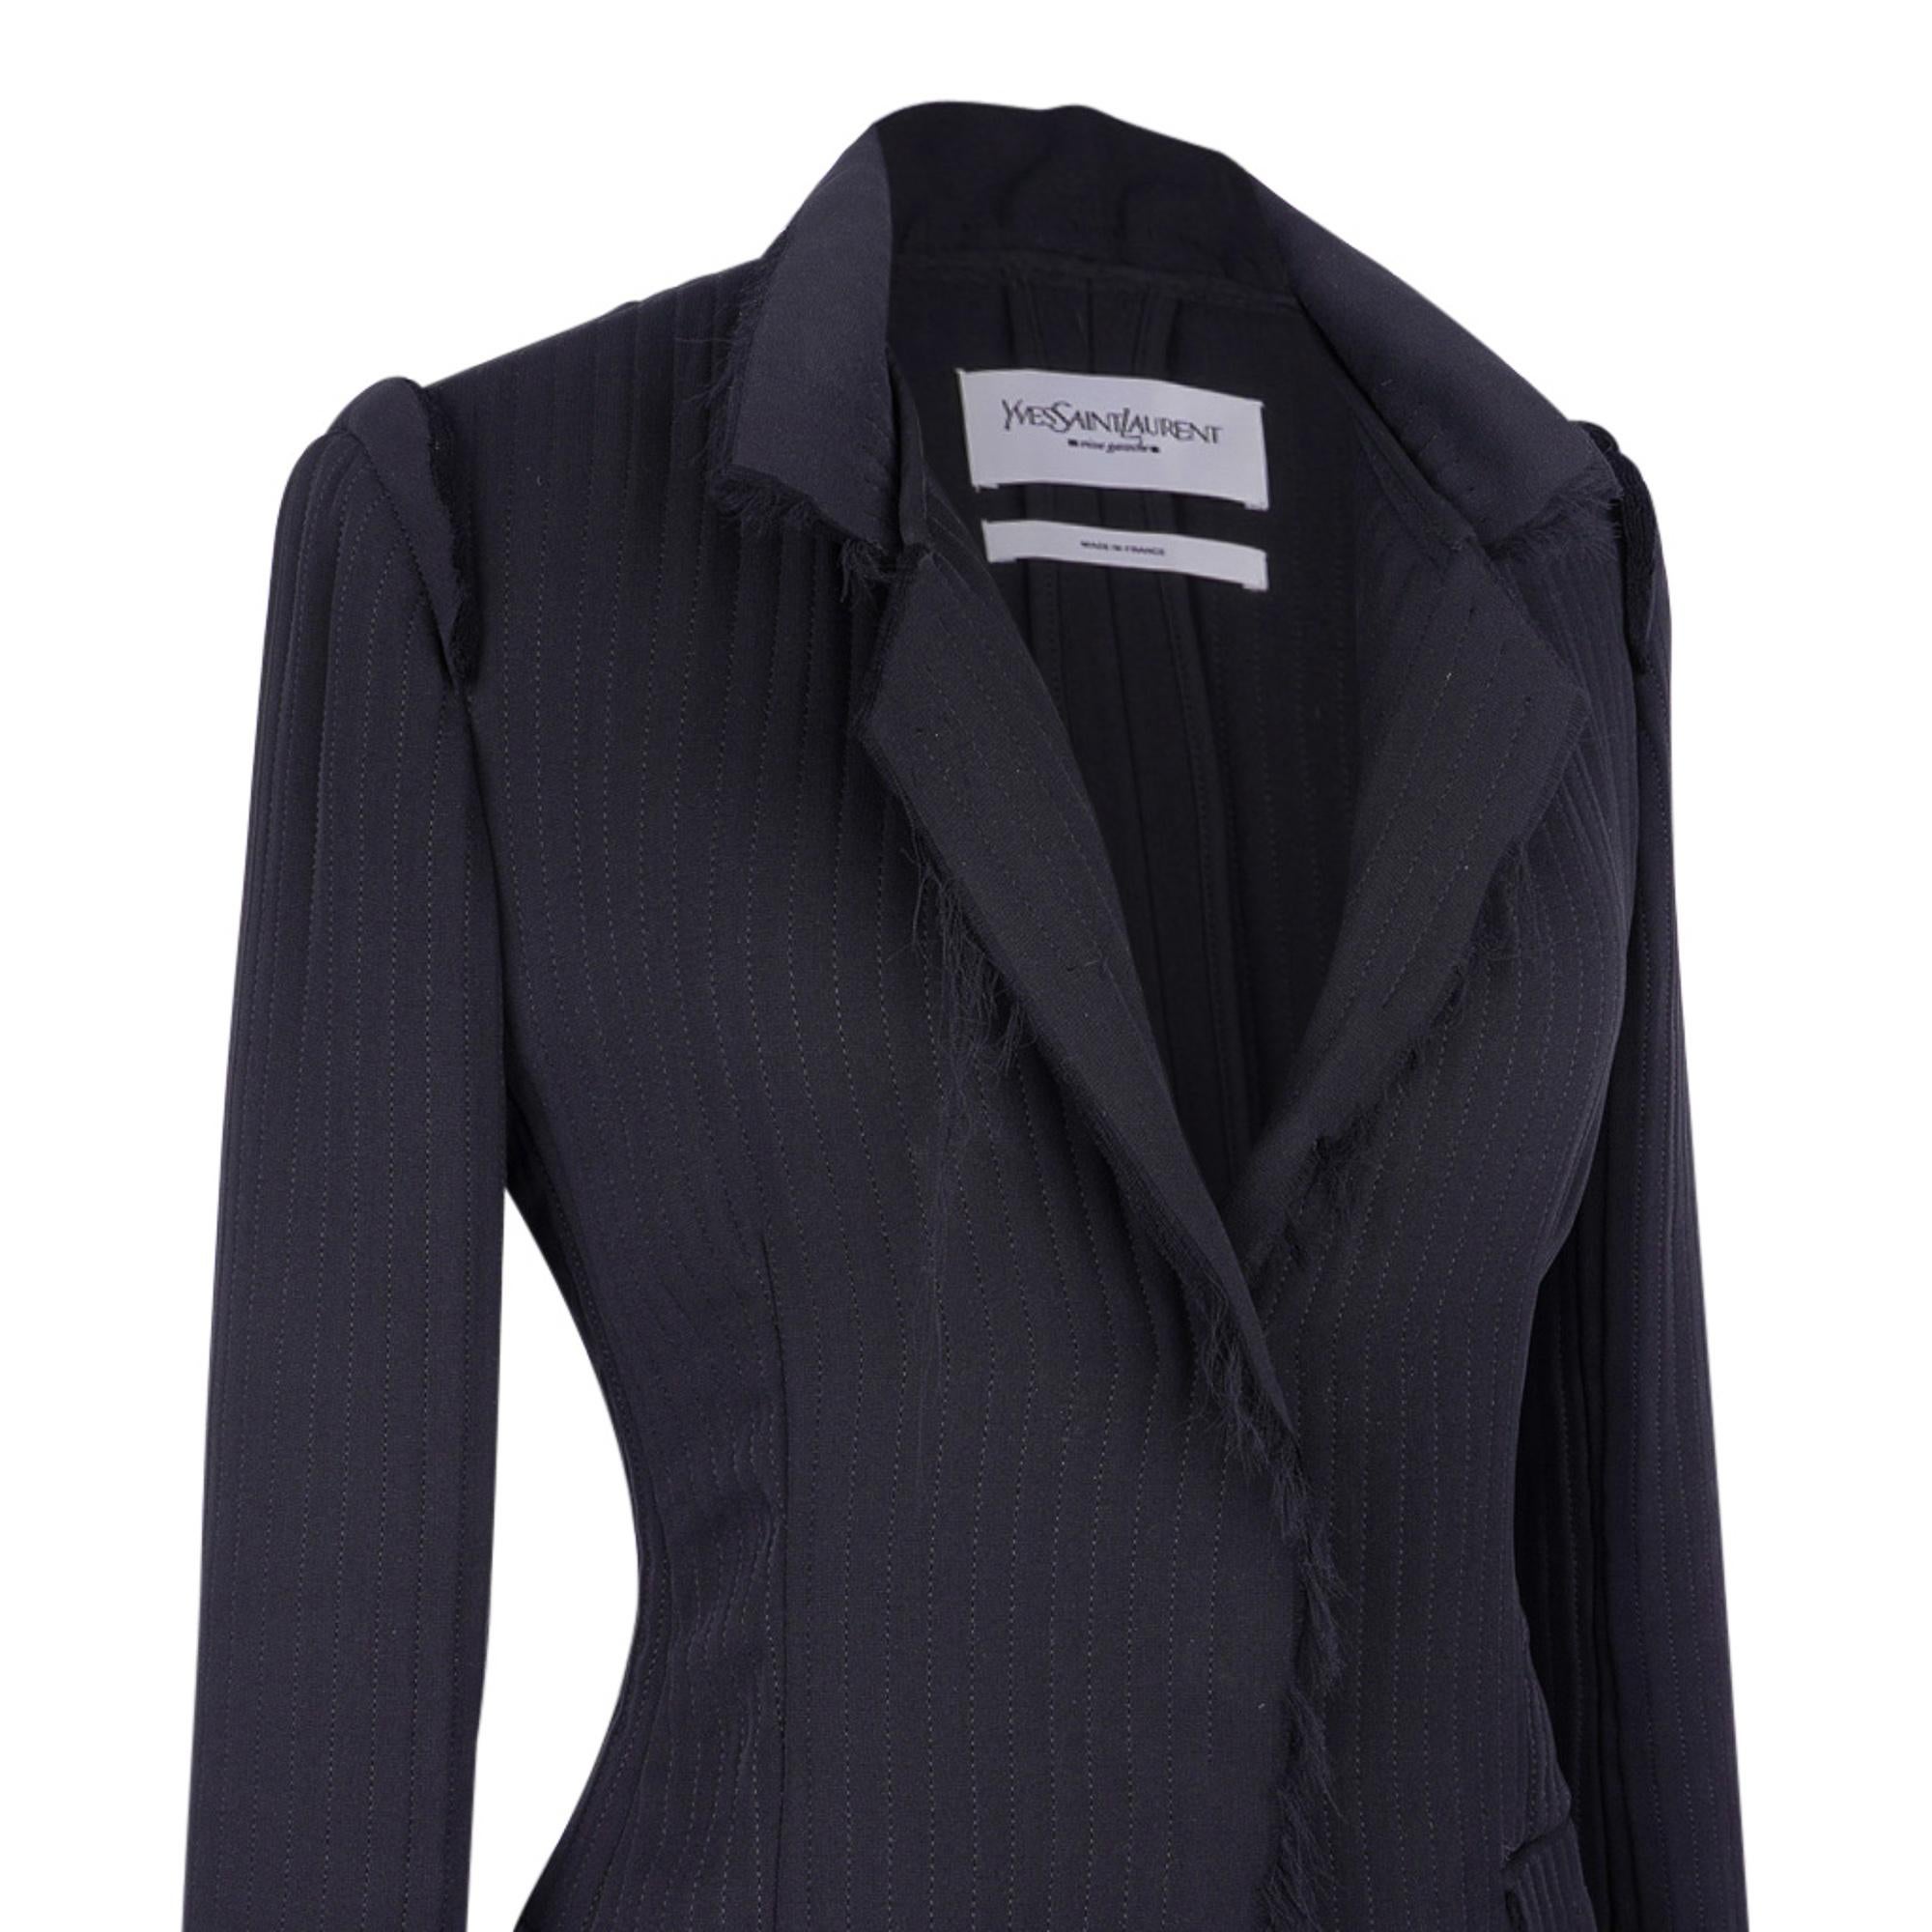 Yves Saint Laurent Jacket Exquisite Tom Ford Creation in Layers 36 3